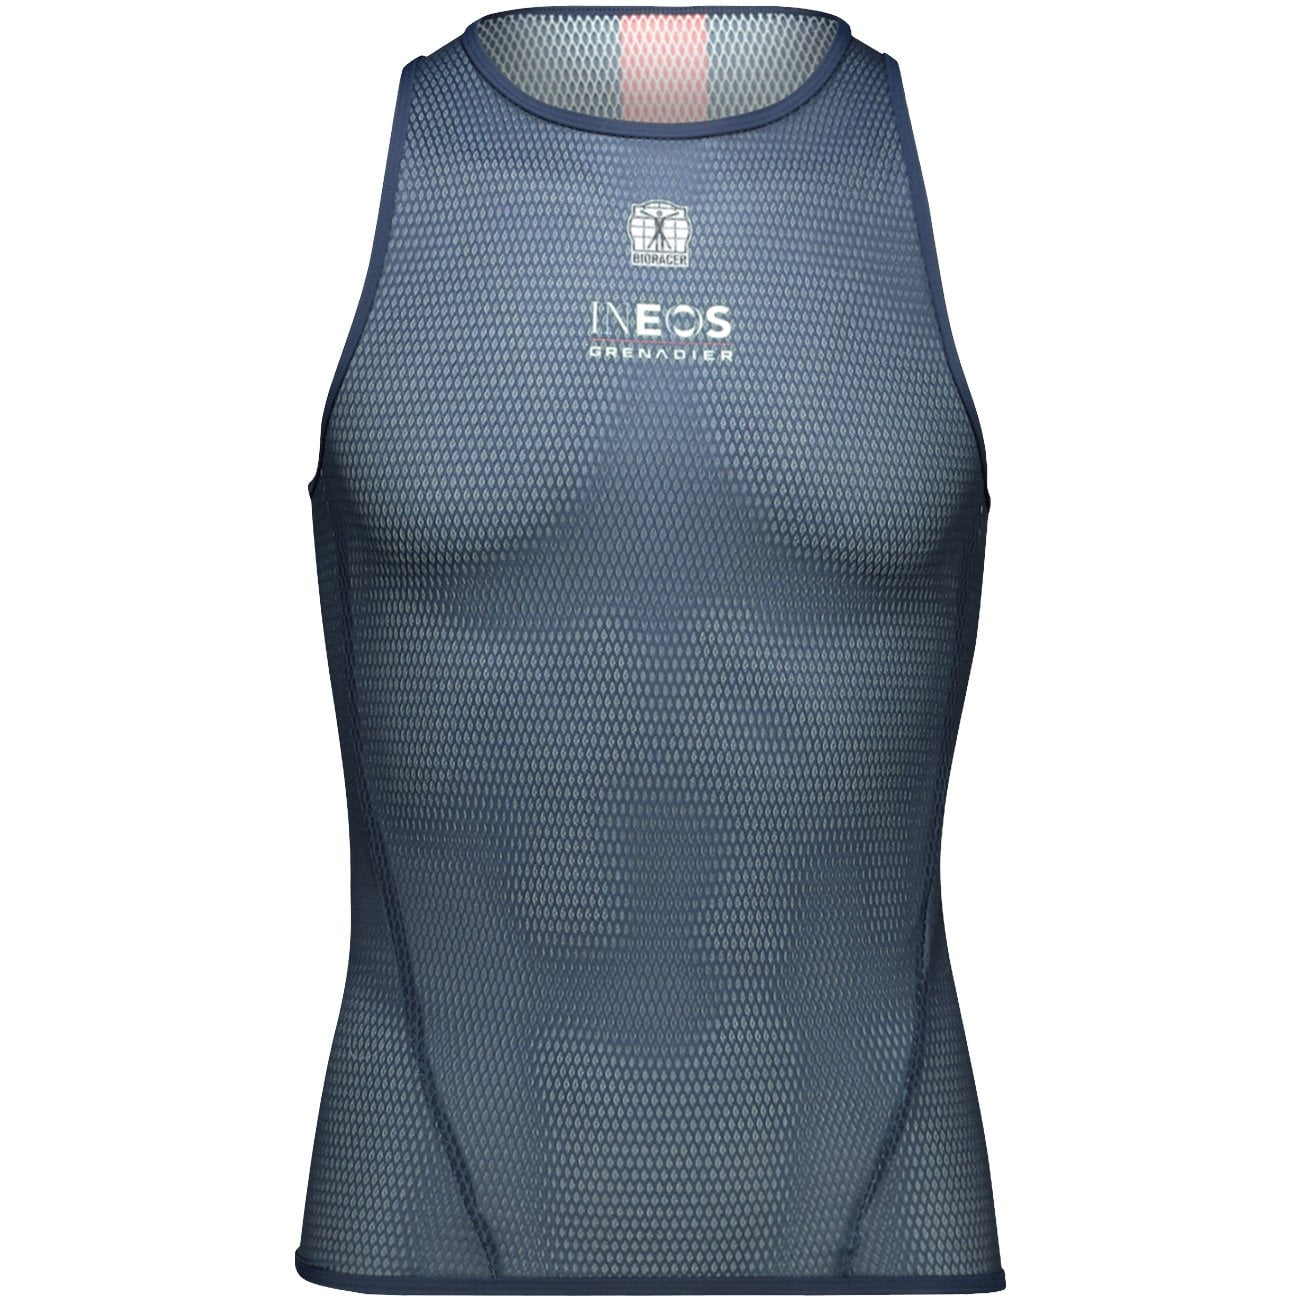 INEOS Grenadiers Cycling Breeze 2023 Base Layer, for men, size 2XL